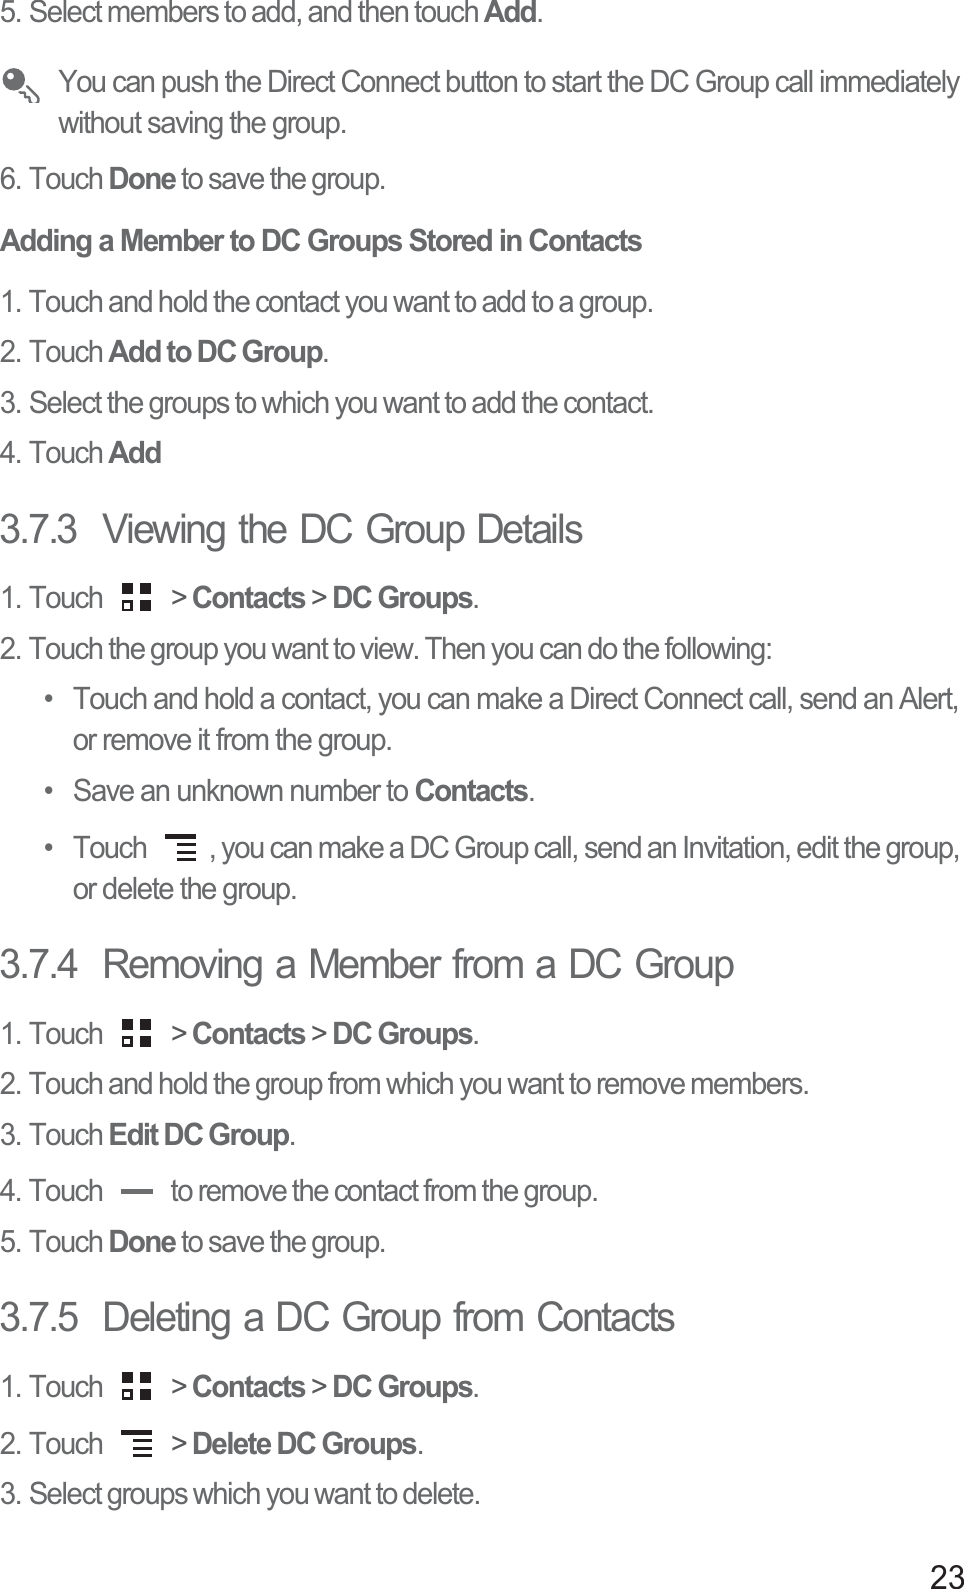 235. Select members to add, and then touch Add.You can push the Direct Connect button to start the DC Group call immediately without saving the group.6. Touch Done to save the group.Adding a Member to DC Groups Stored in Contacts1. Touch and hold the contact you want to add to a group.2. Touch Add to DC Group.3. Select the groups to which you want to add the contact.4. Touch Add3.7.3  Viewing the DC Group Details1. Touch   &gt; Contacts &gt; DC Groups.2. Touch the group you want to view. Then you can do the following:•  Touch and hold a contact, you can make a Direct Connect call, send an Alert, or remove it from the group.•  Save an unknown number to Contacts.•  Touch  , you can make a DC Group call, send an Invitation, edit the group, or delete the group.3.7.4  Removing a Member from a DC Group1. Touch   &gt; Contacts &gt; DC Groups.2. Touch and hold the group from which you want to remove members.3. Touch Edit DC Group.4. Touch   to remove the contact from the group.5. Touch Done to save the group.3.7.5  Deleting a DC Group from Contacts1. Touch   &gt; Contacts &gt; DC Groups.2. Touch   &gt; Delete DC Groups.3. Select groups which you want to delete.